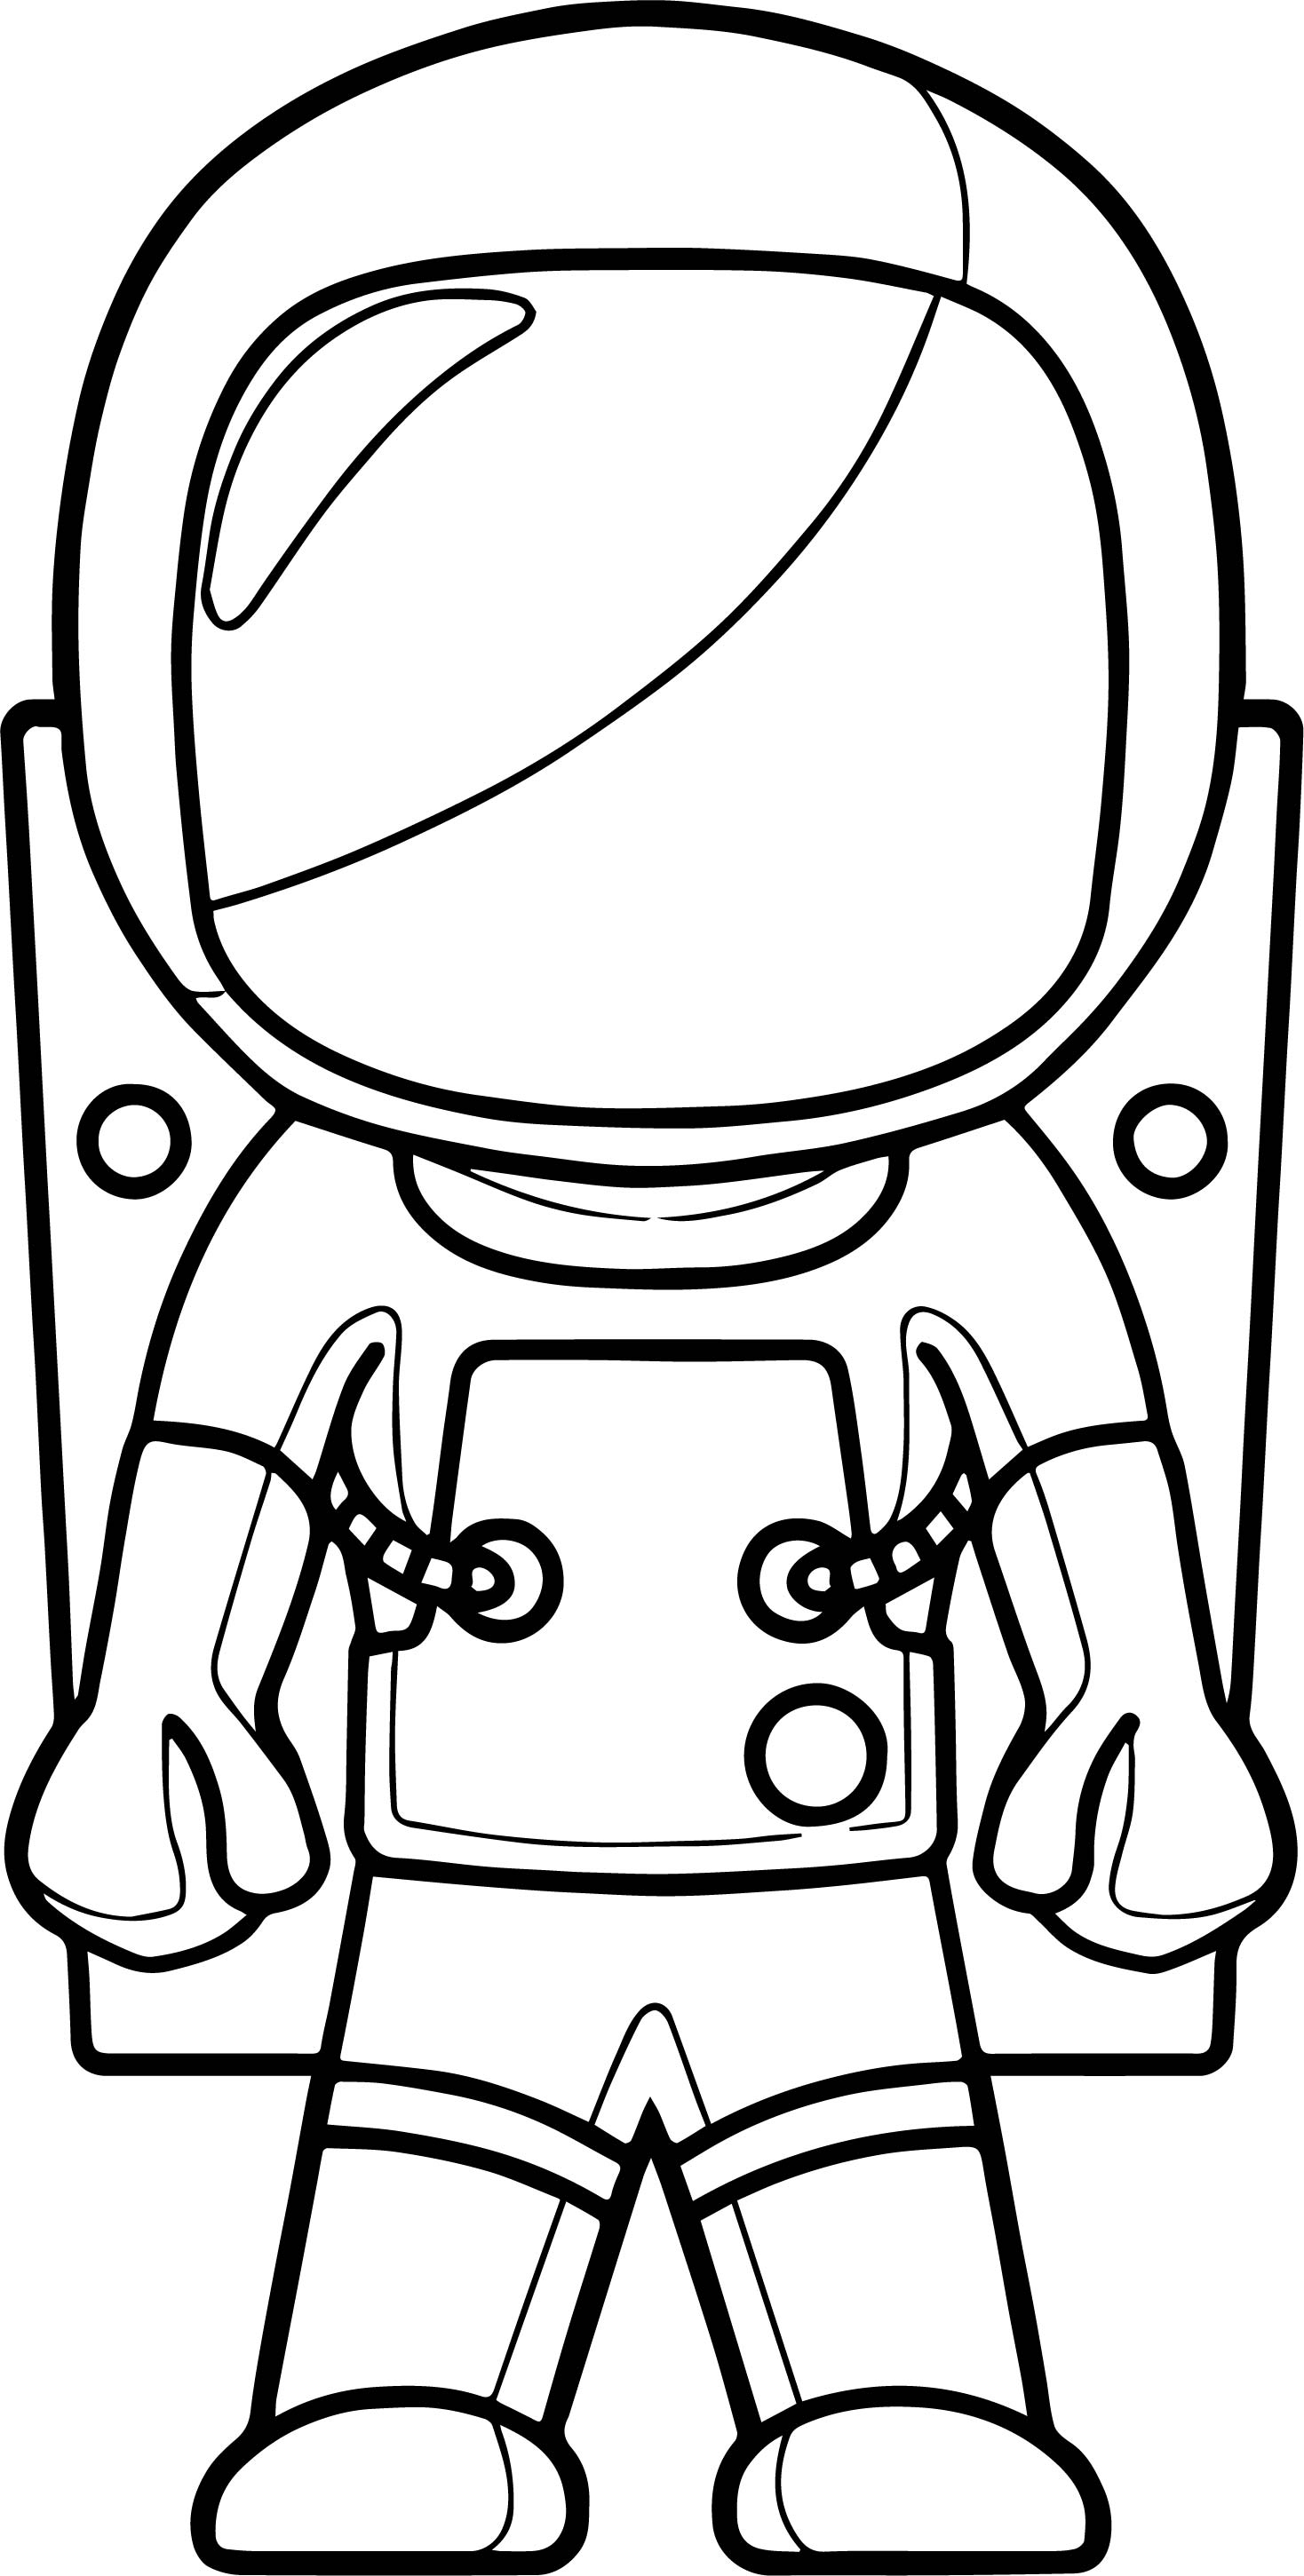 Astronaut Front View Coloring Page Wecoloringpagecom